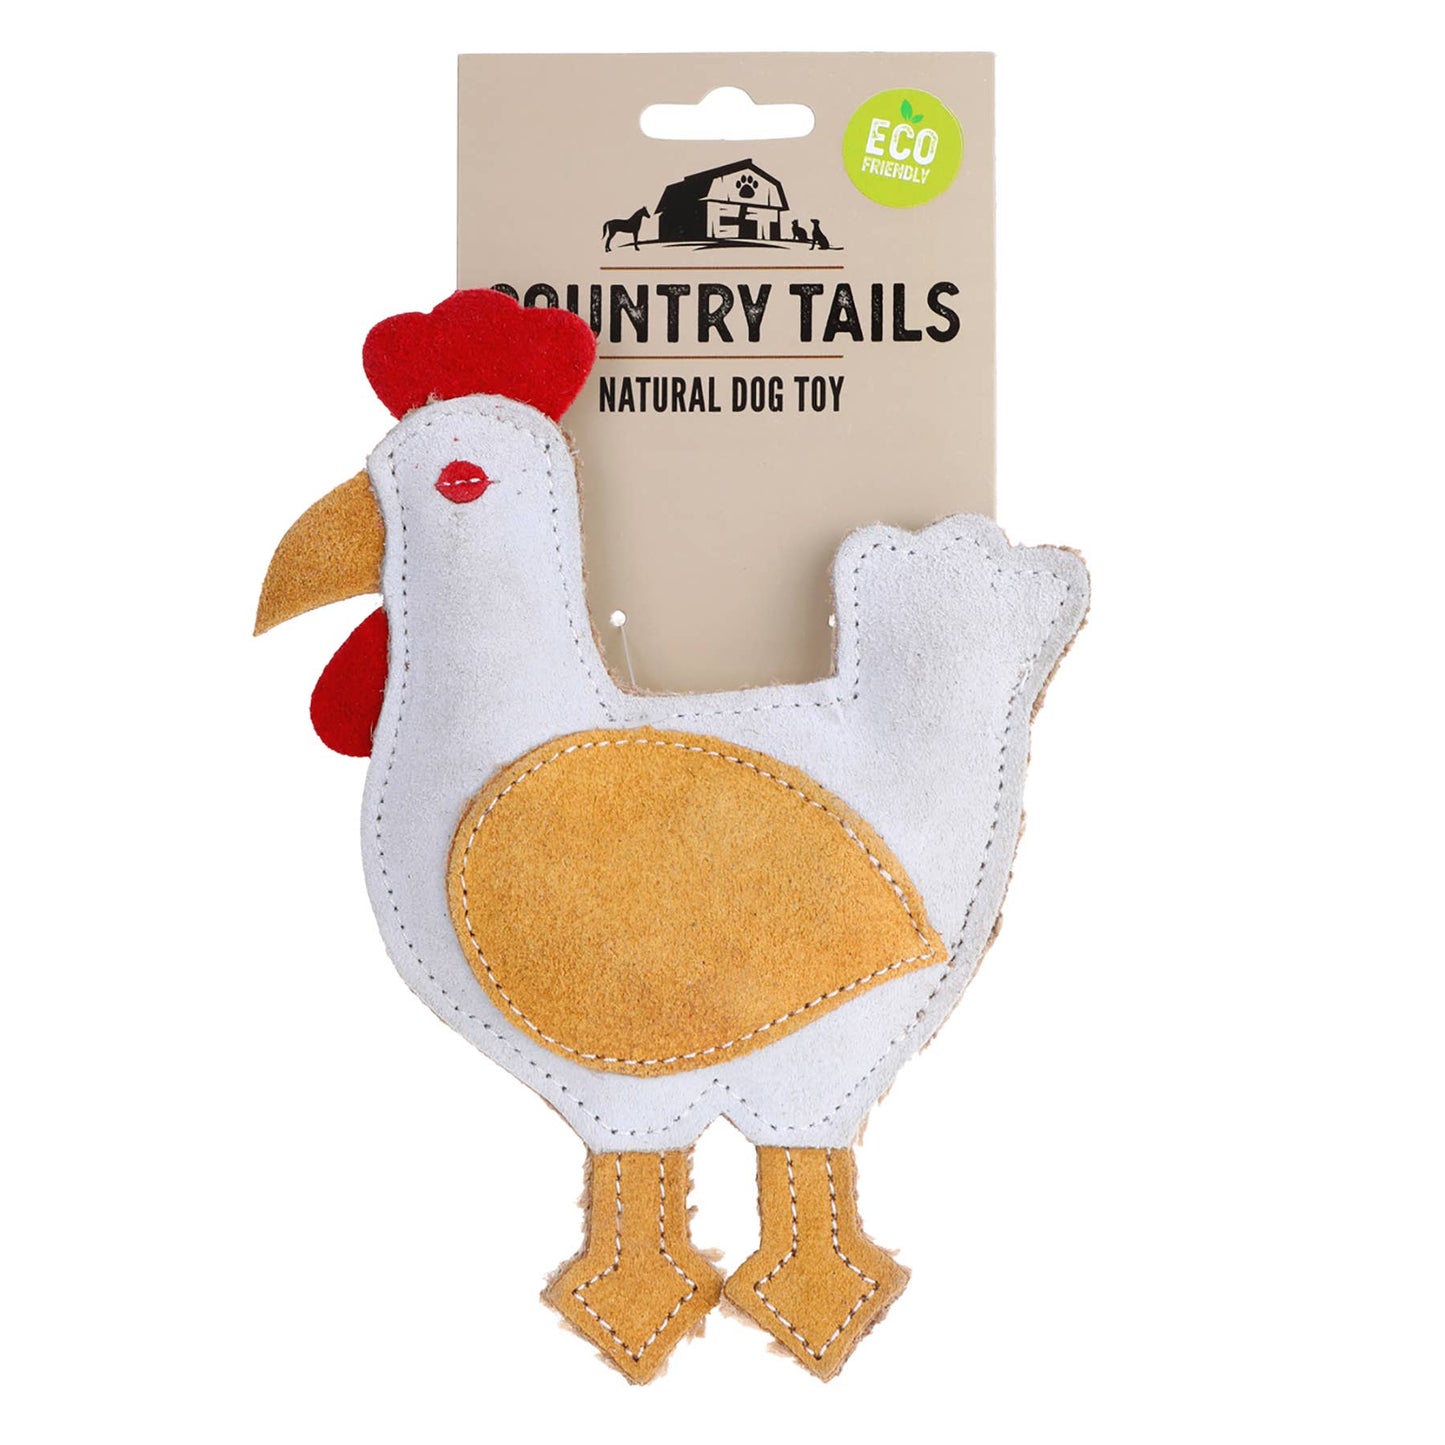 Country Tails Farm Animal Dog Toys